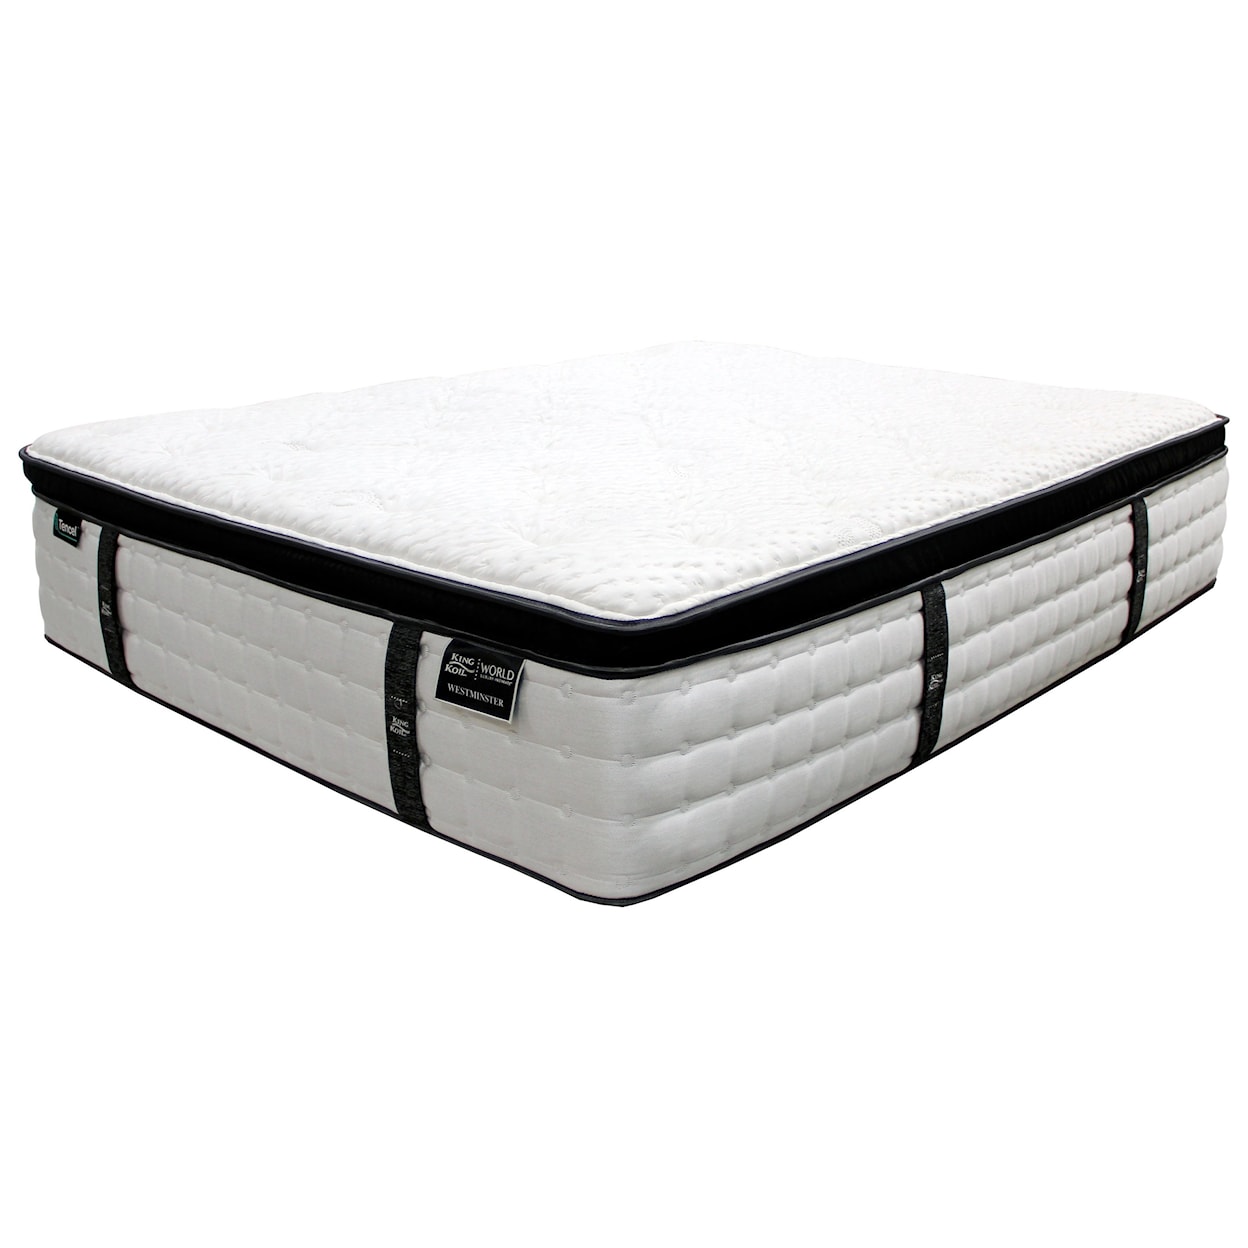 King Koil Westminster CET Twin XL Pocketed Coil Mattress